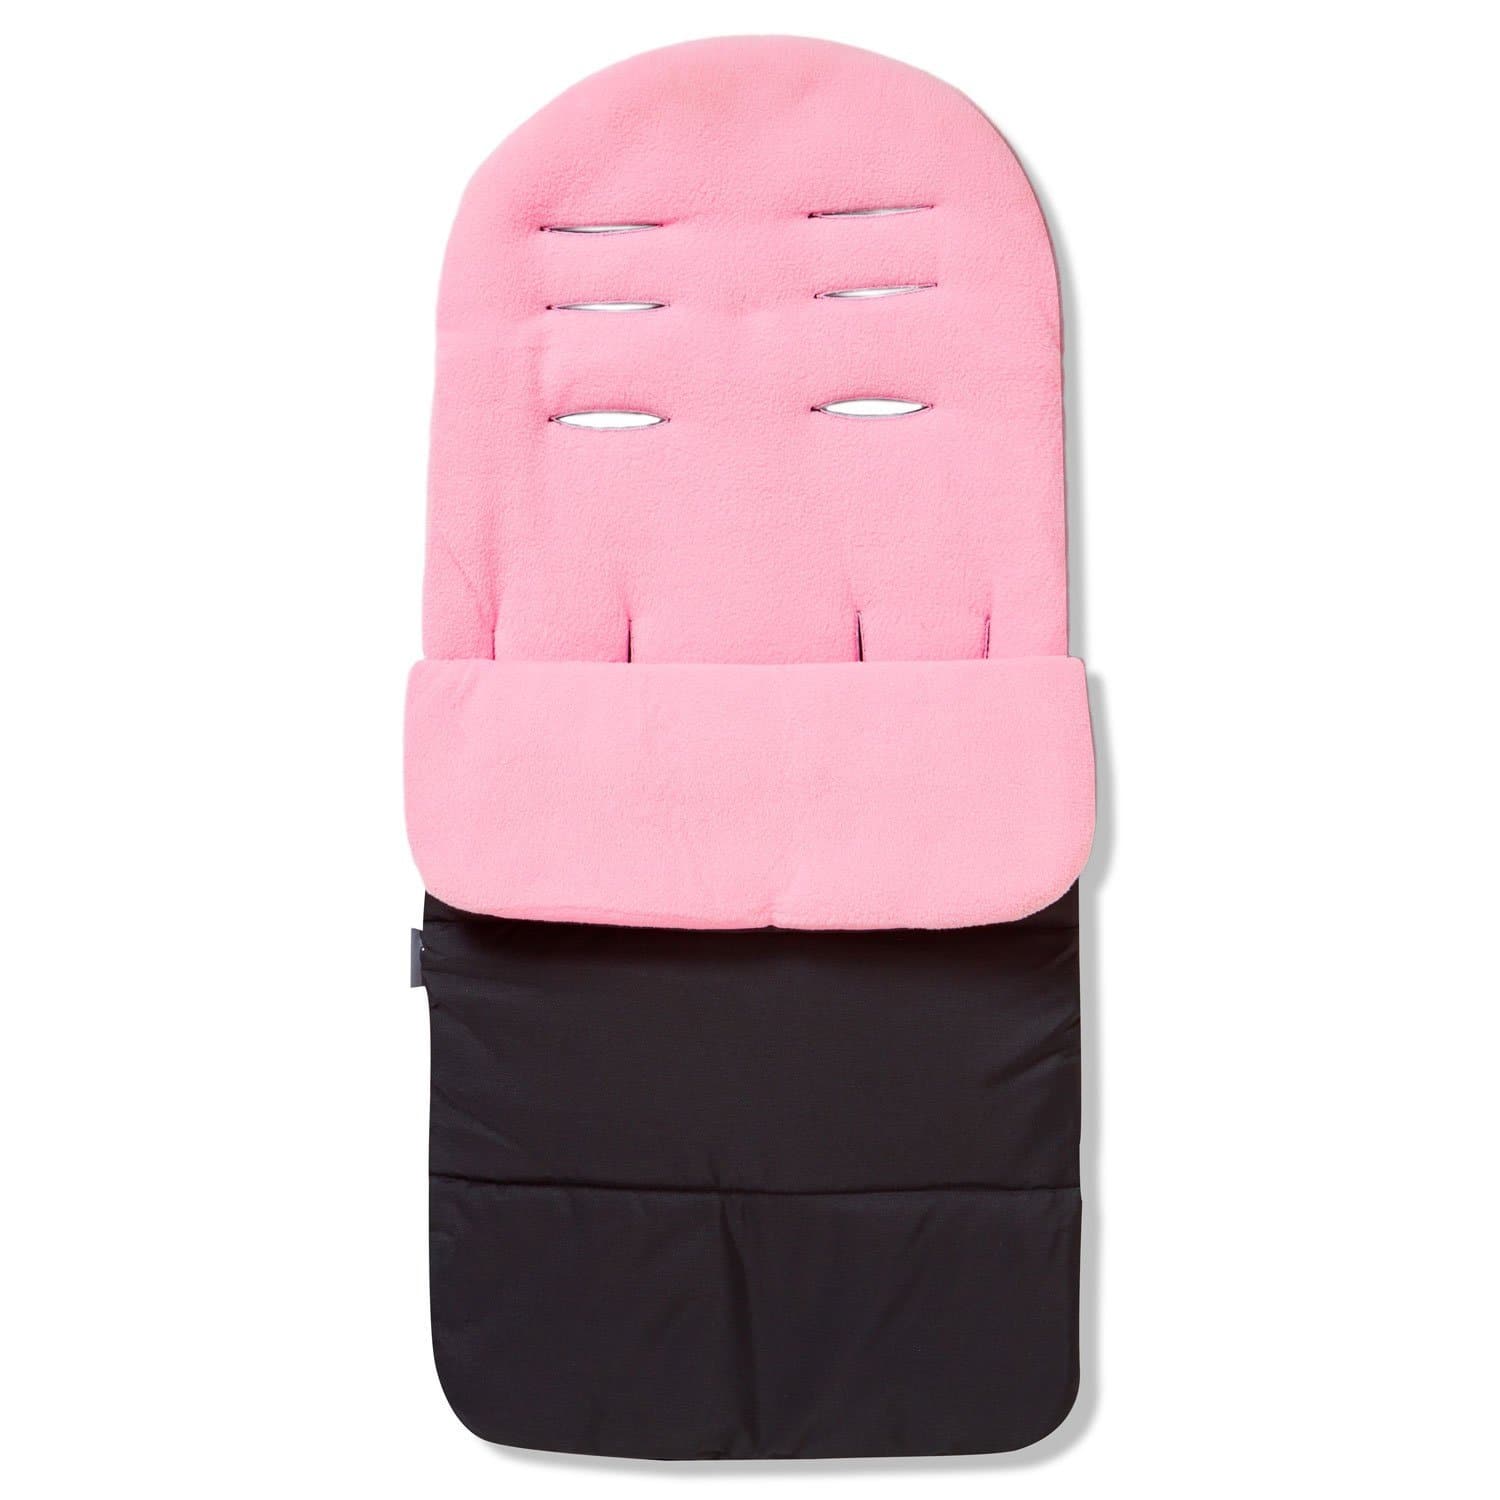 Premium Footmuff / Cosy Toes Compatible with Maxi Cosi - Candy Pink / Fits All Models | For Your Little One